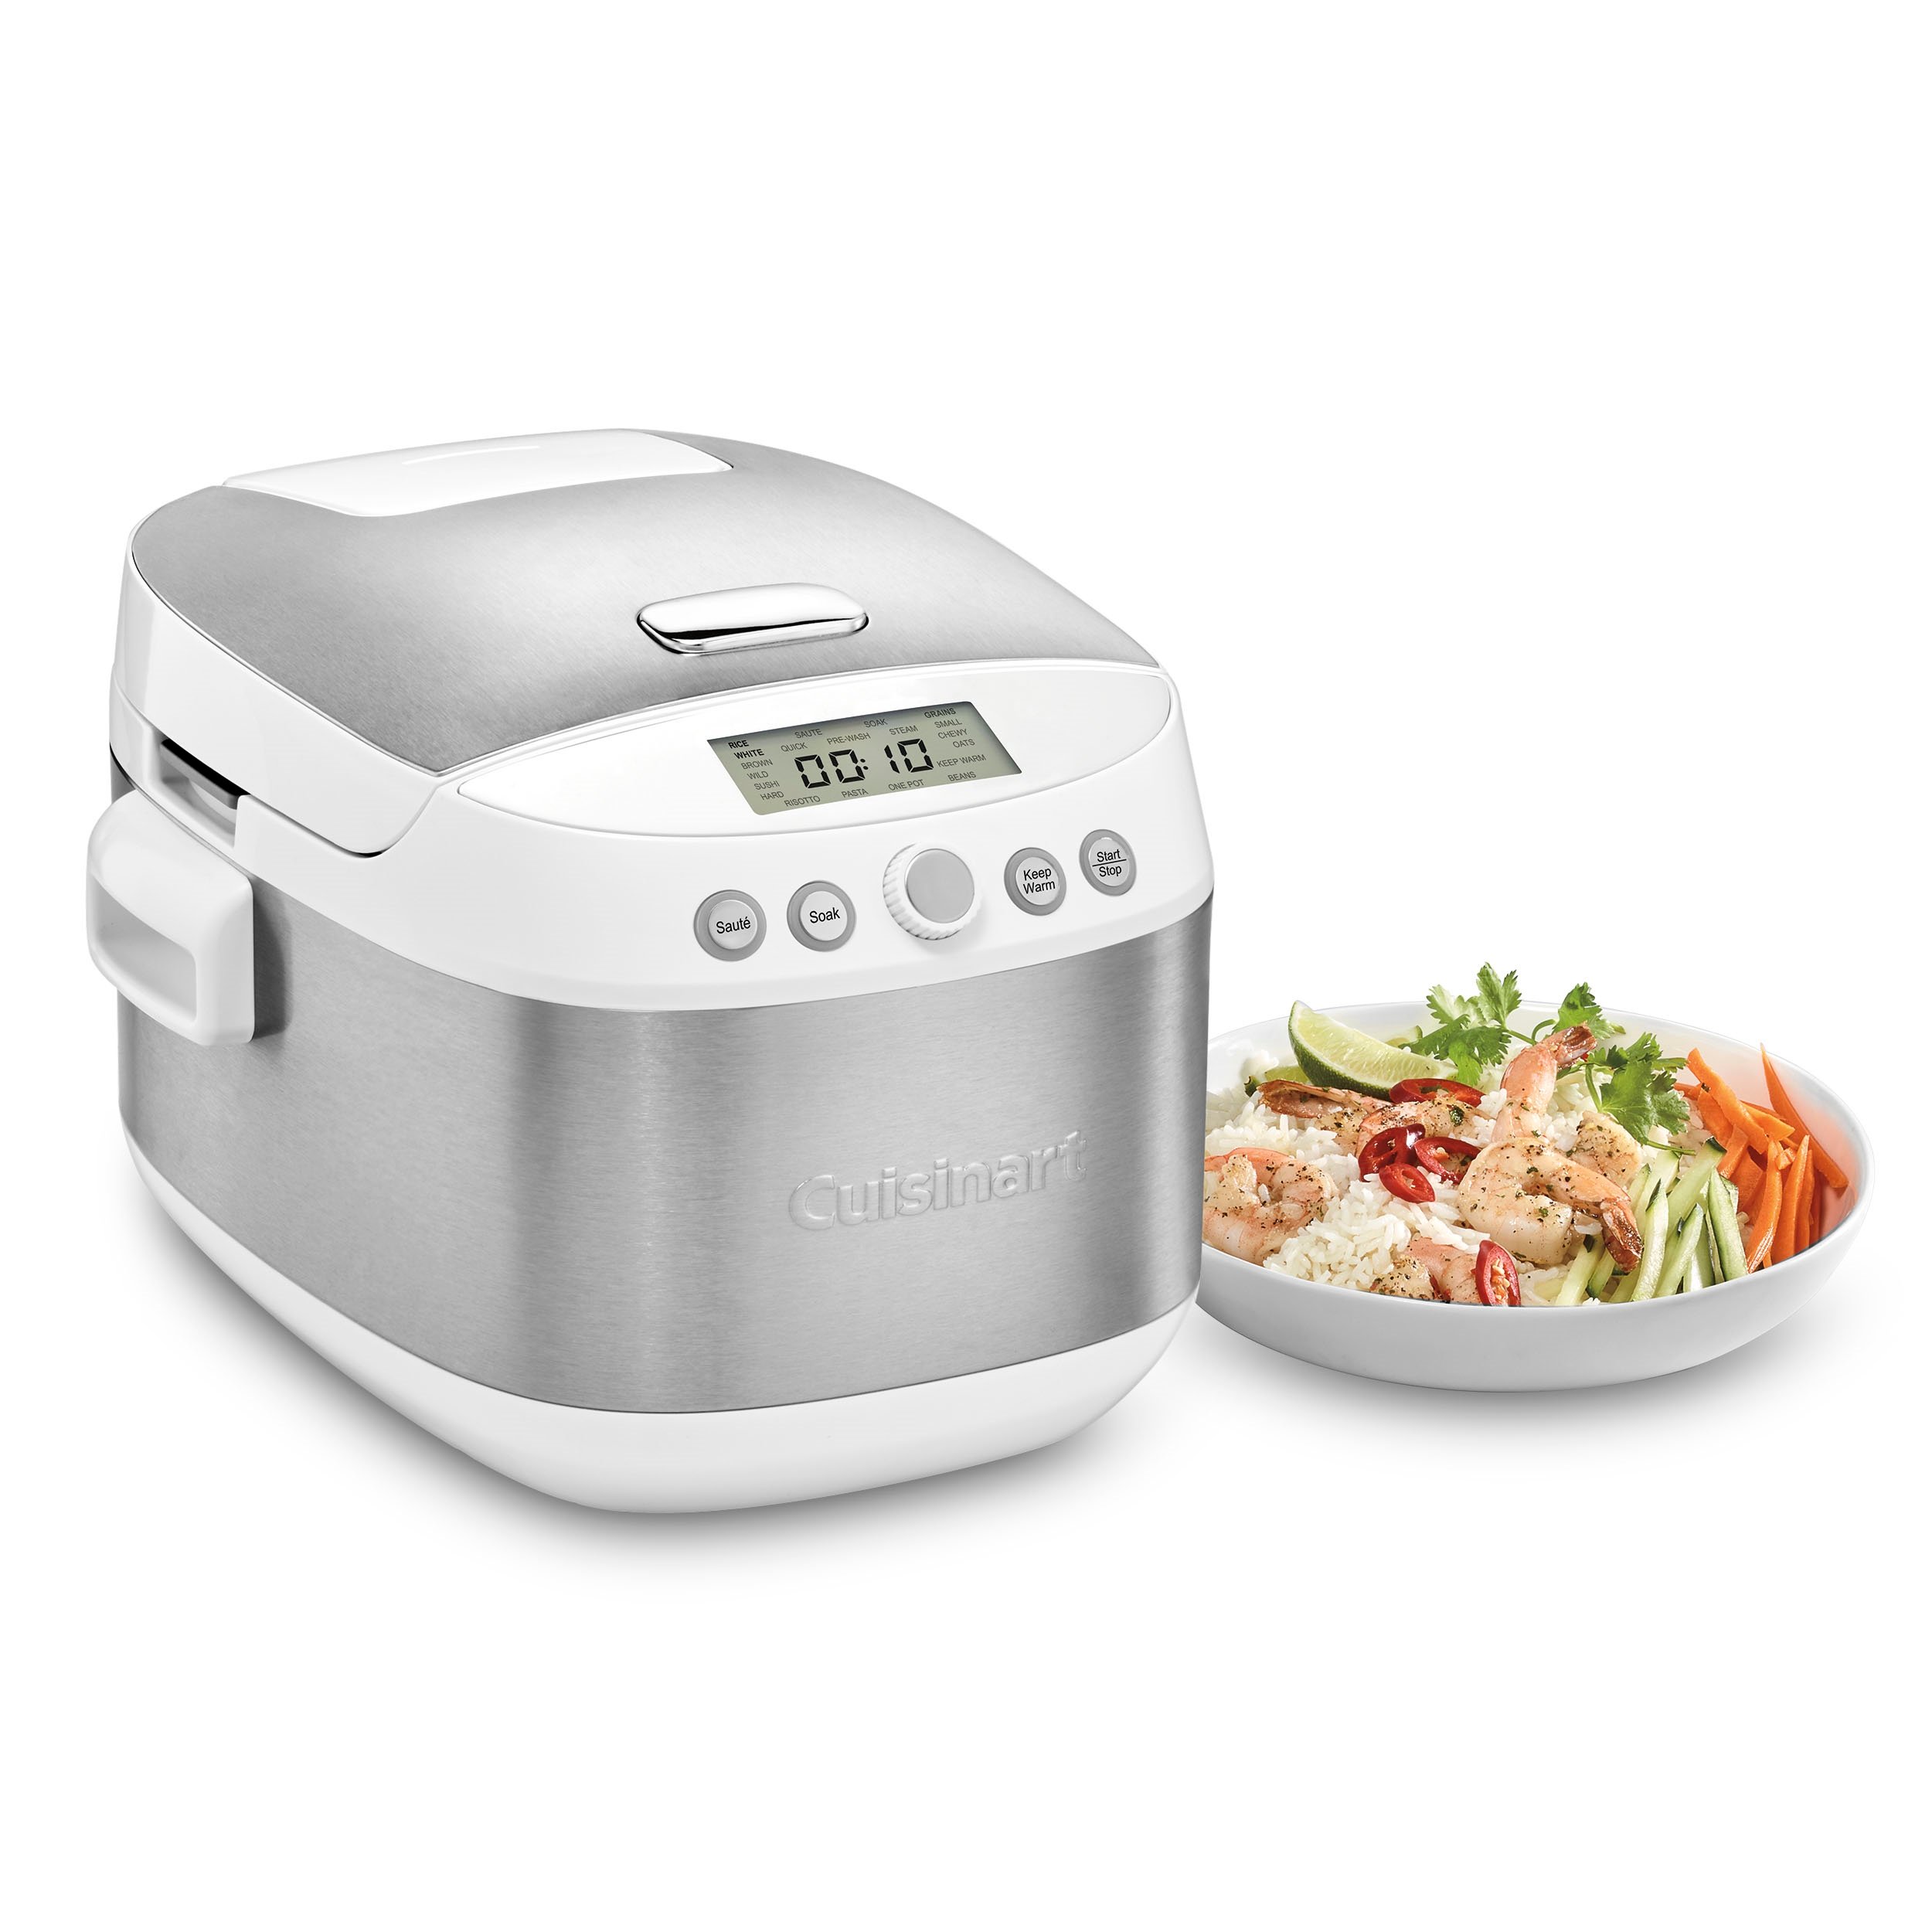 Cuisinart Multi-Cooker Cookbook for Beginners: 1000-Day Amazingly